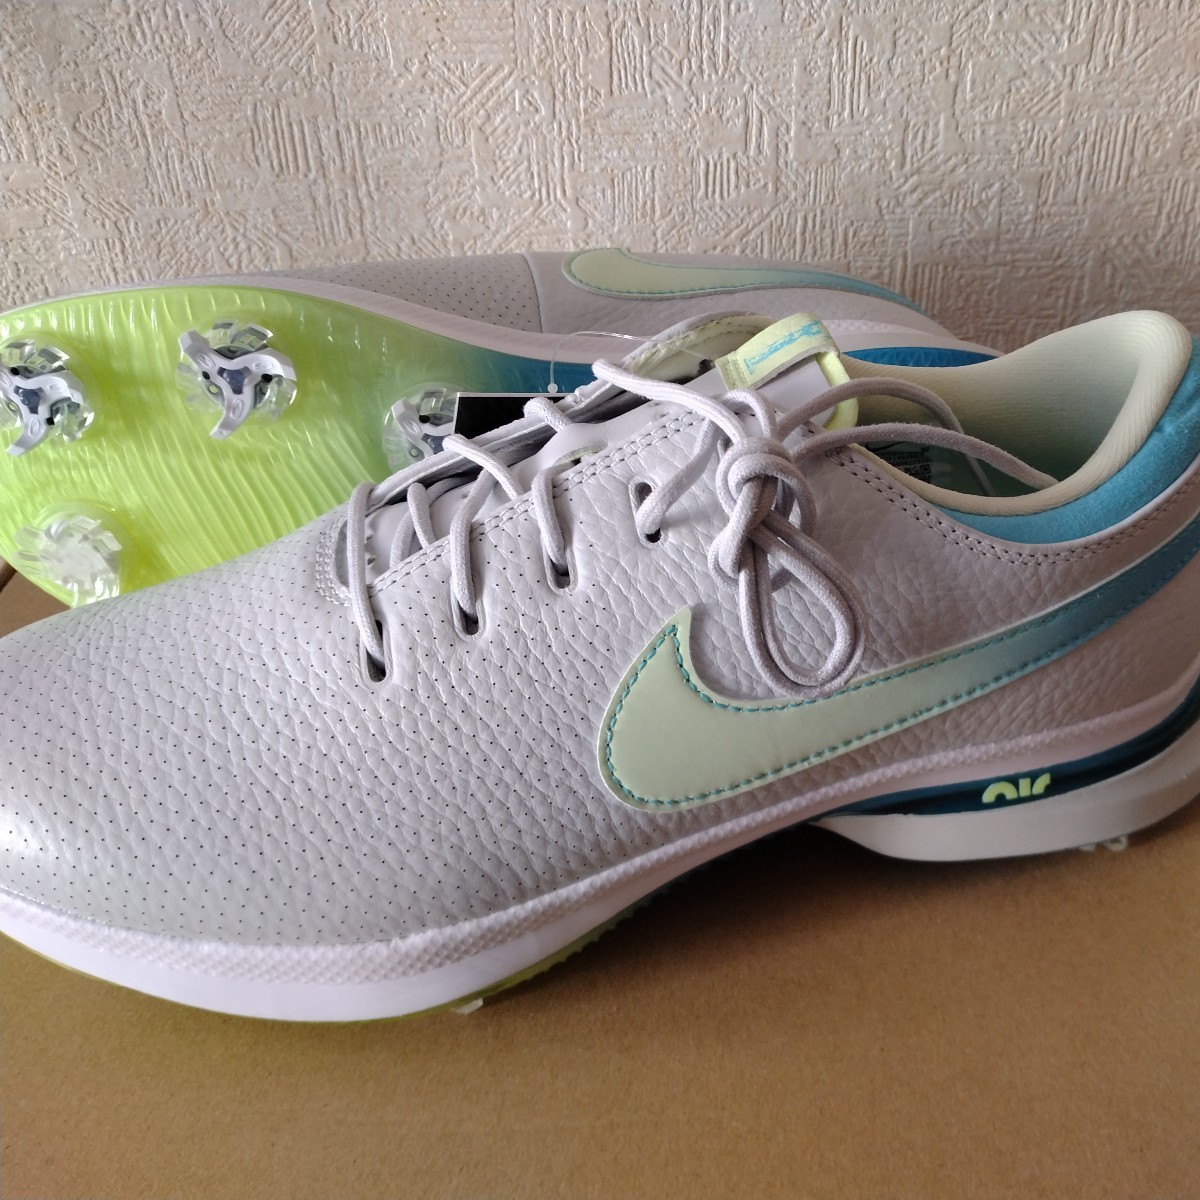 * new goods Japan regular goods * Nike air zoom Victory Tour 3 * golf shoes ( wide )26.5.* Pro use model 